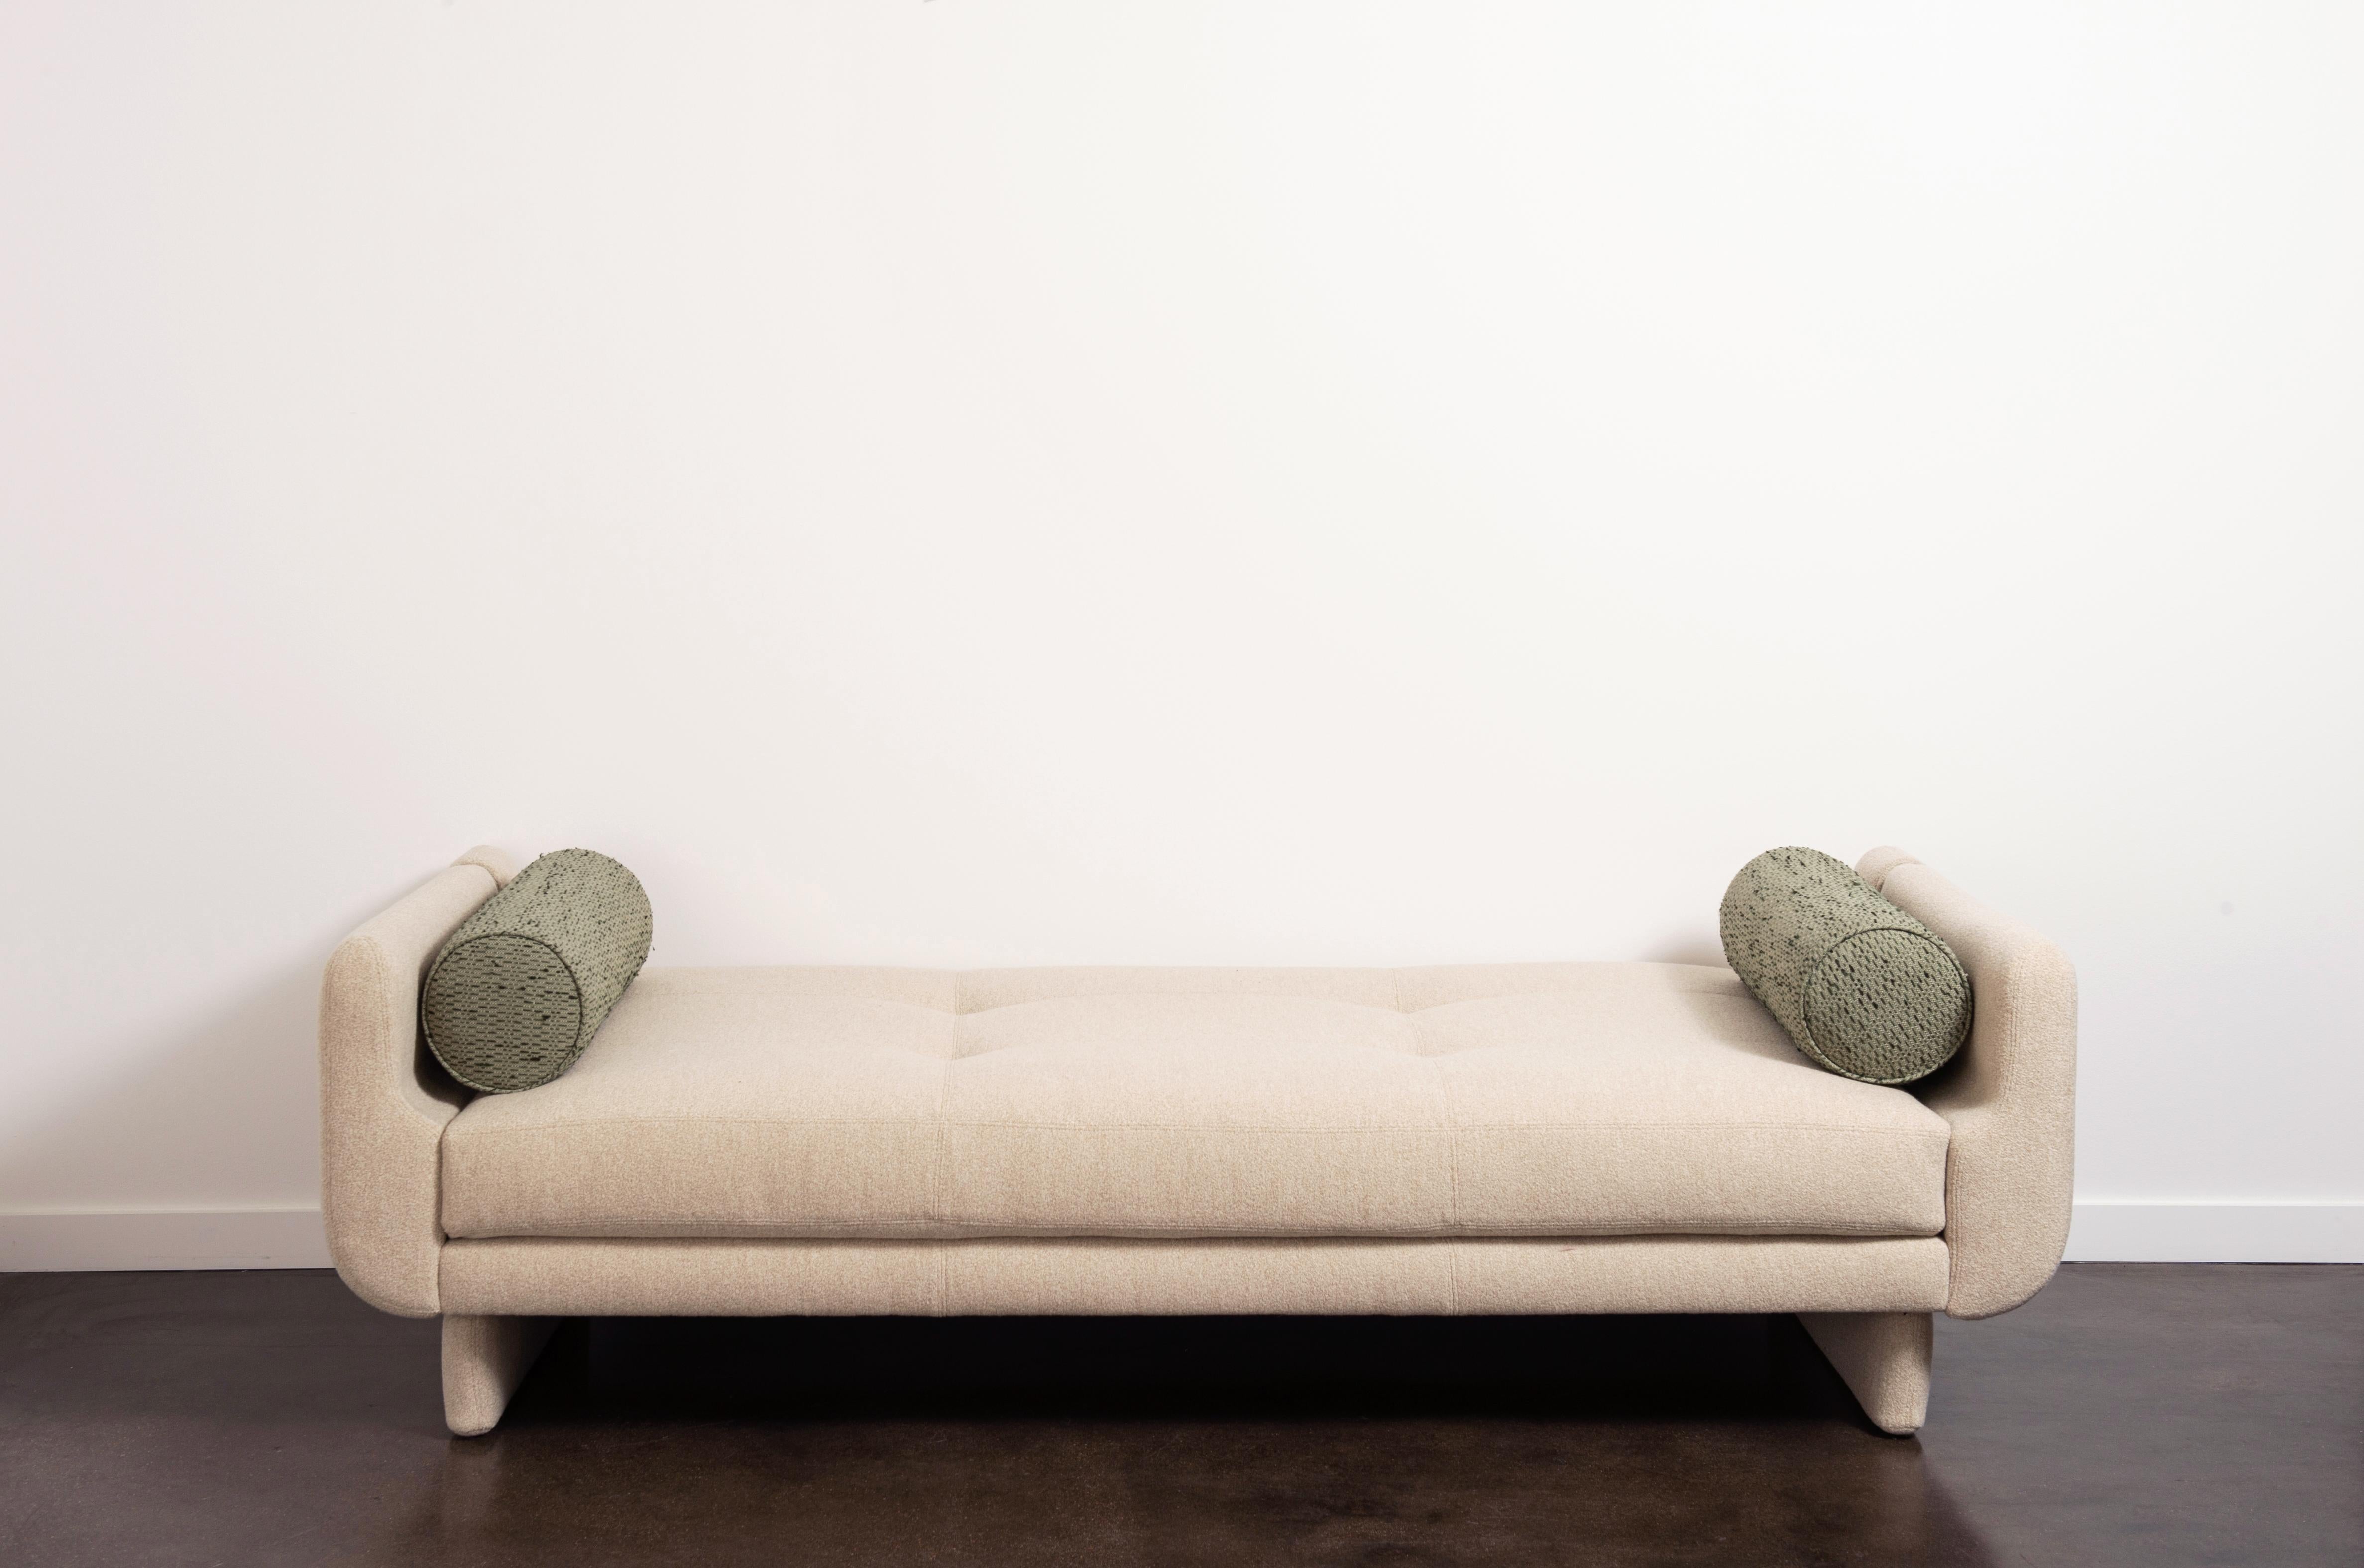 A rare sofa and daybed designed by Vladimir Kagan for American Leather Studios. The sofa has a removable bolster back and two accent bolster pillows. Removing the bolster back, converts the sofa into a daybed. The piece has new cushions and